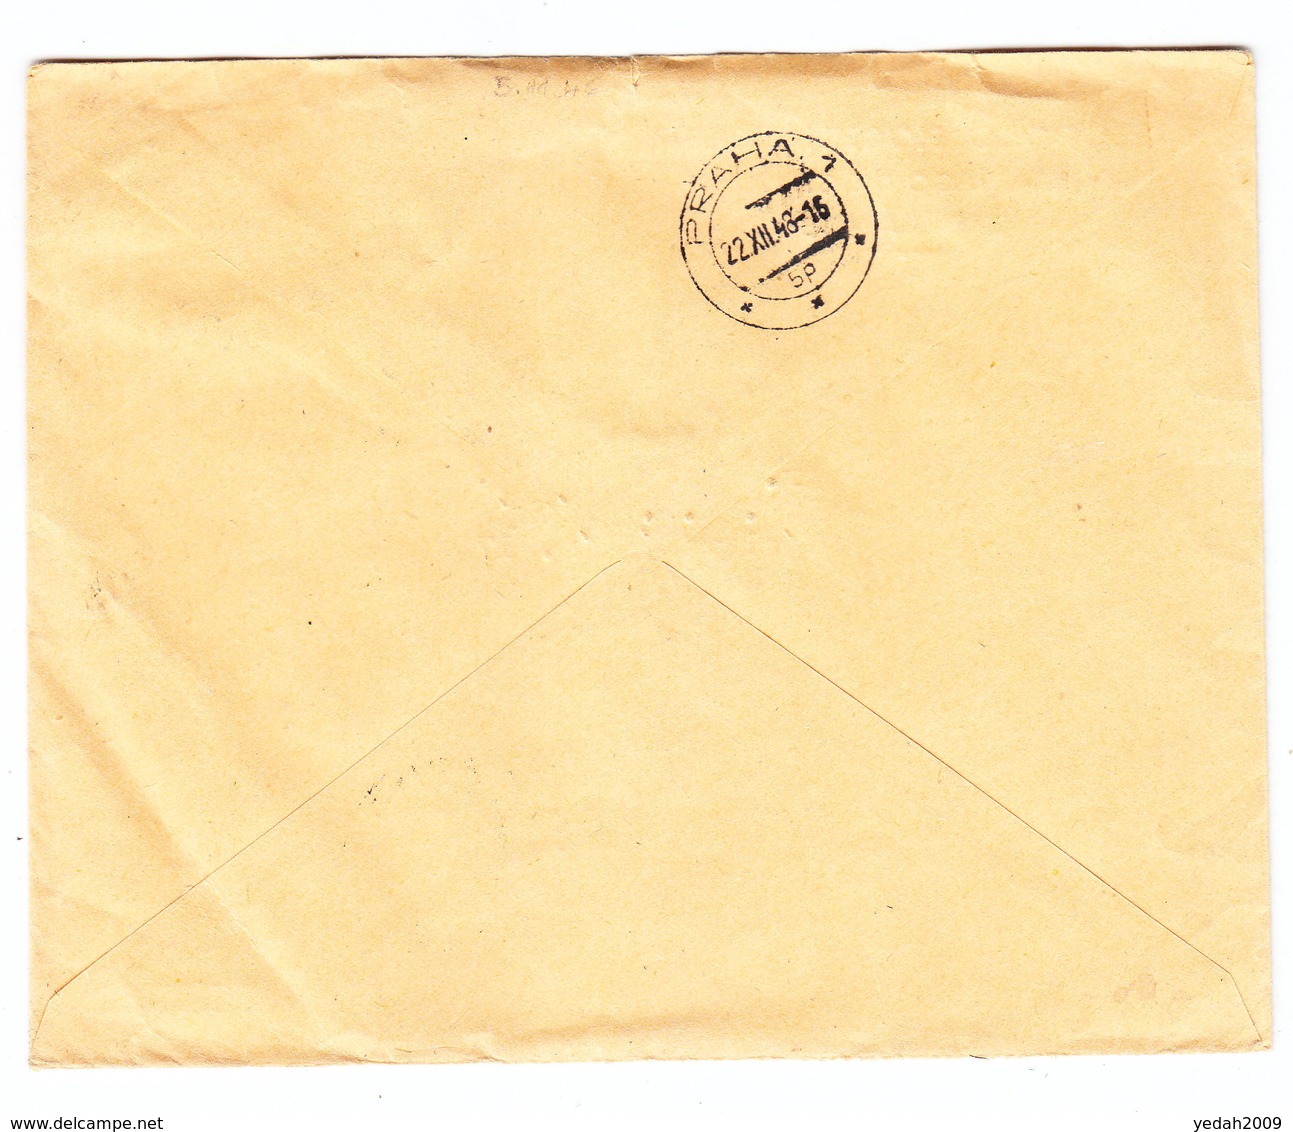 Chile ANTARCTIC COVER 1948 - Chile